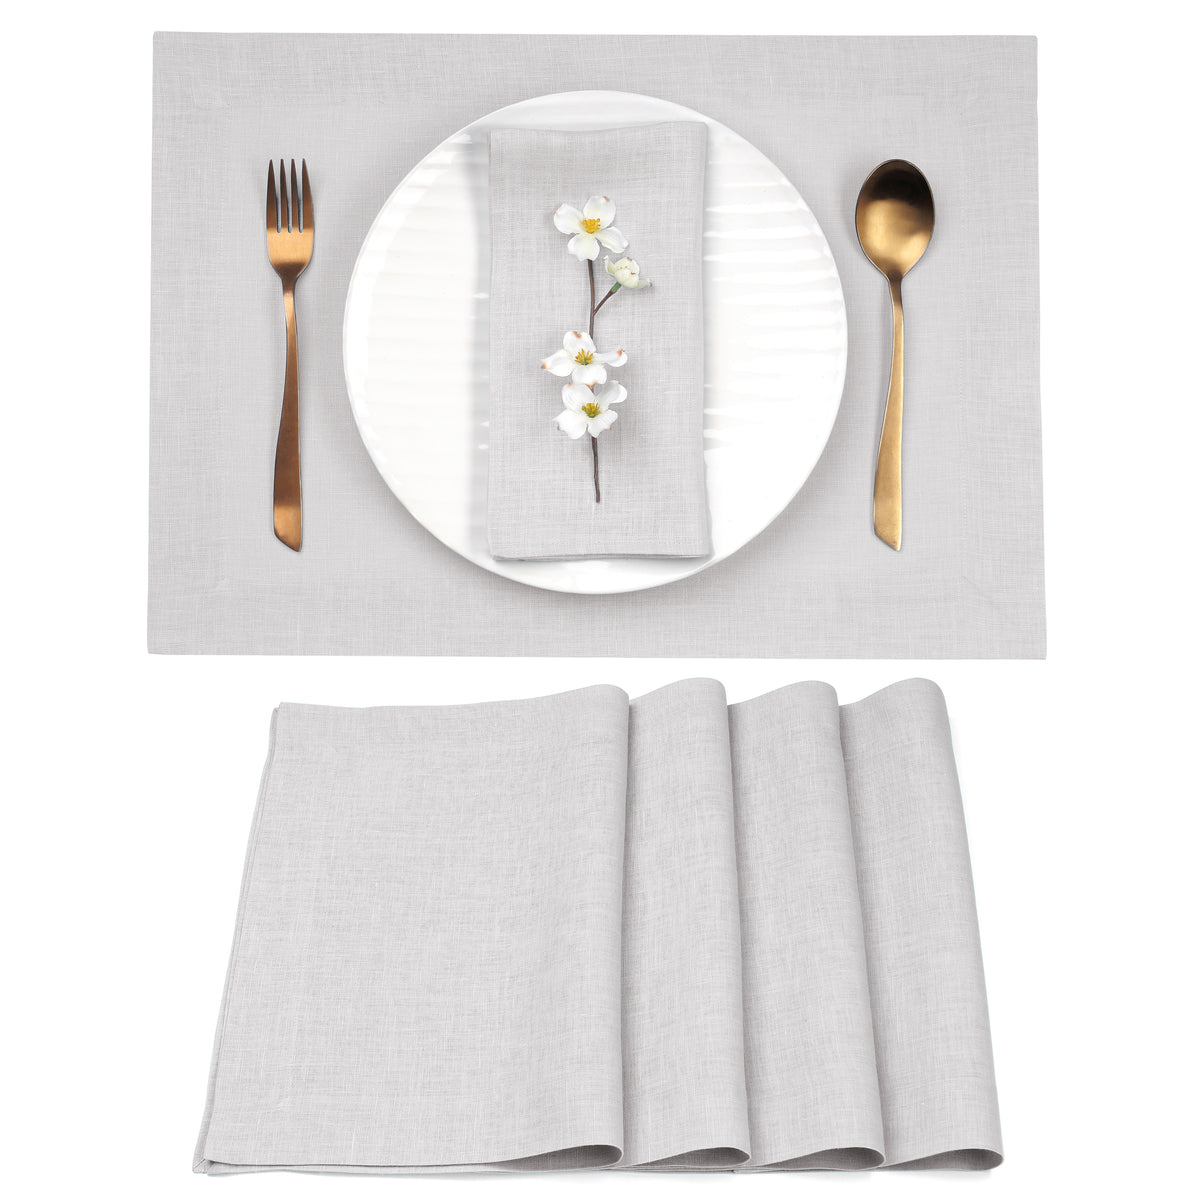 Silver Grey Linen Placemats 14 x 19 Inch Set of 4 - Hemmed